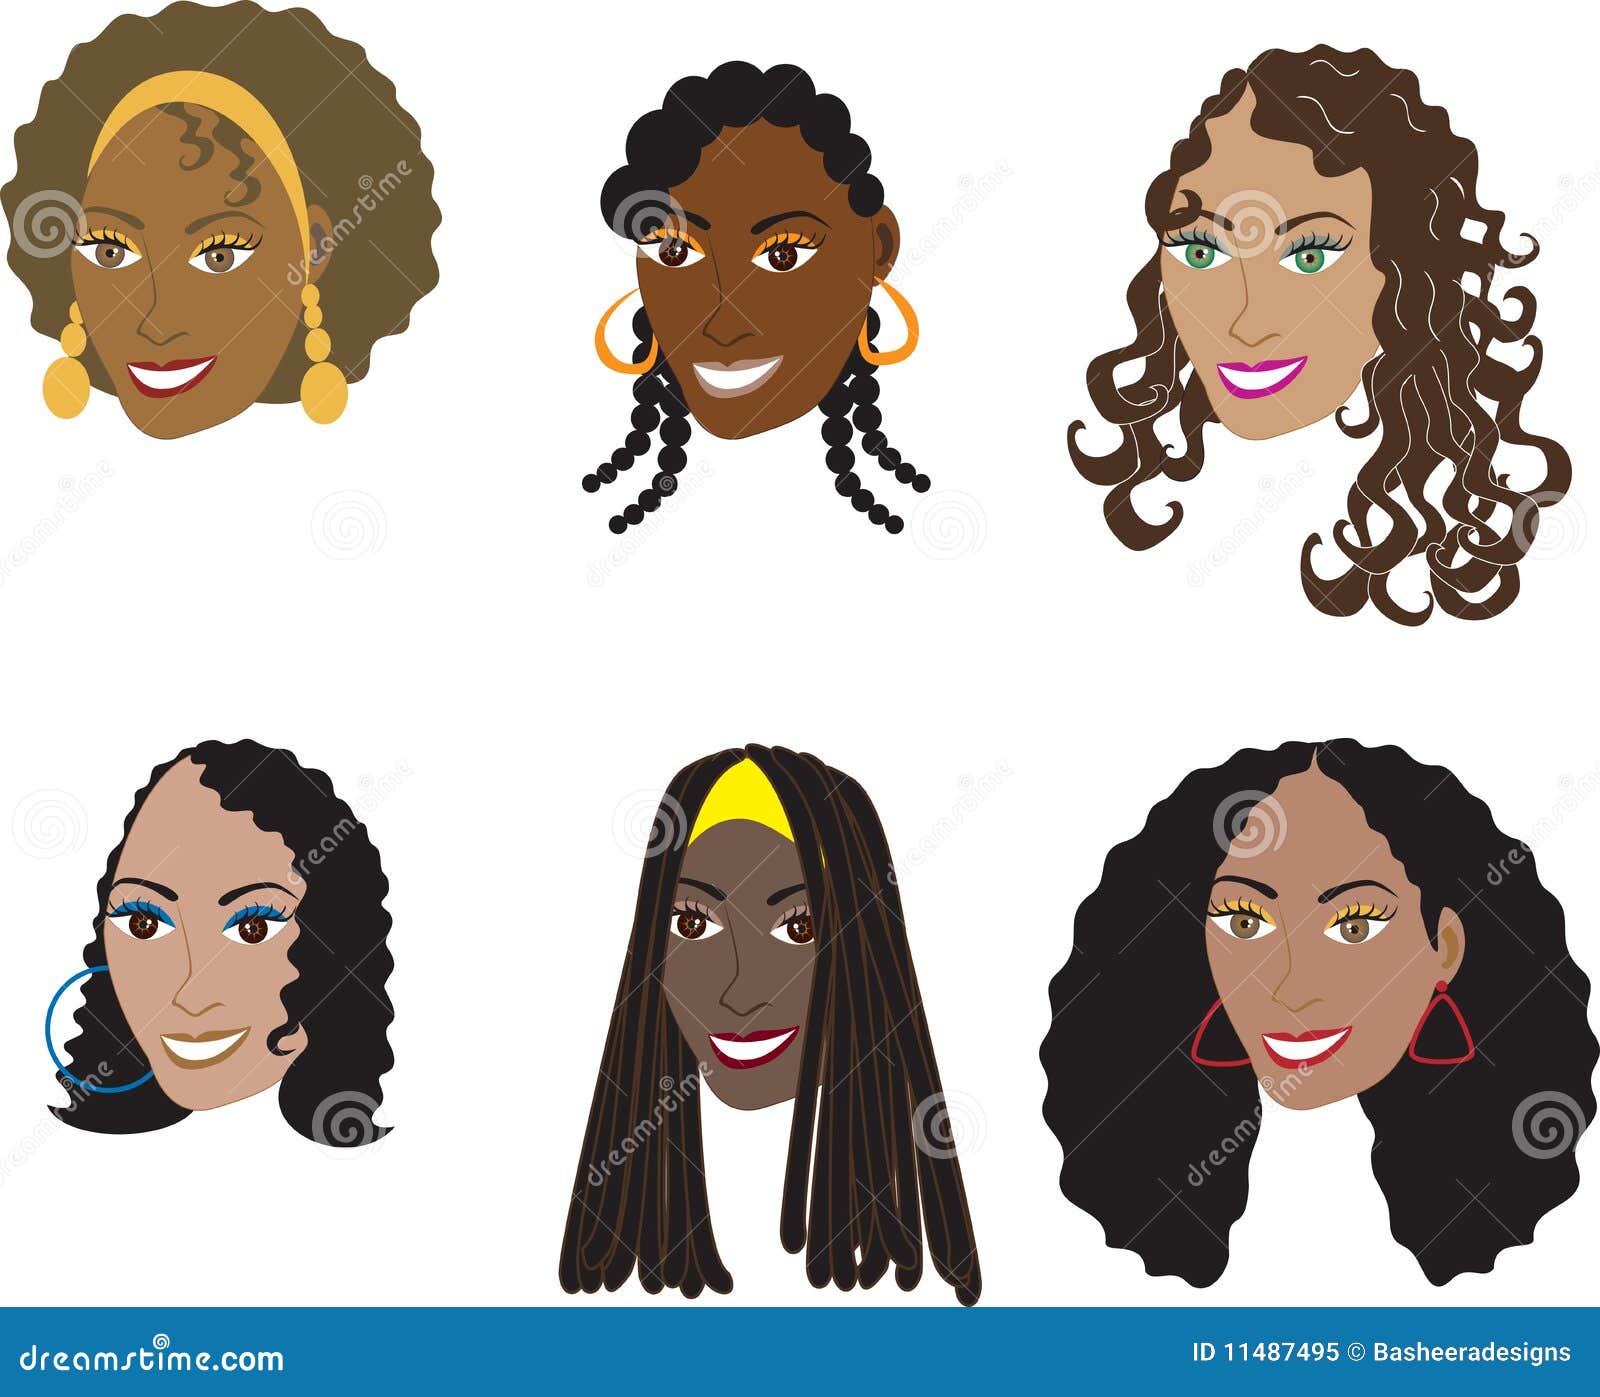 Natural Black Hairstyles 1 stock vector. Illustration of faces - 11487495